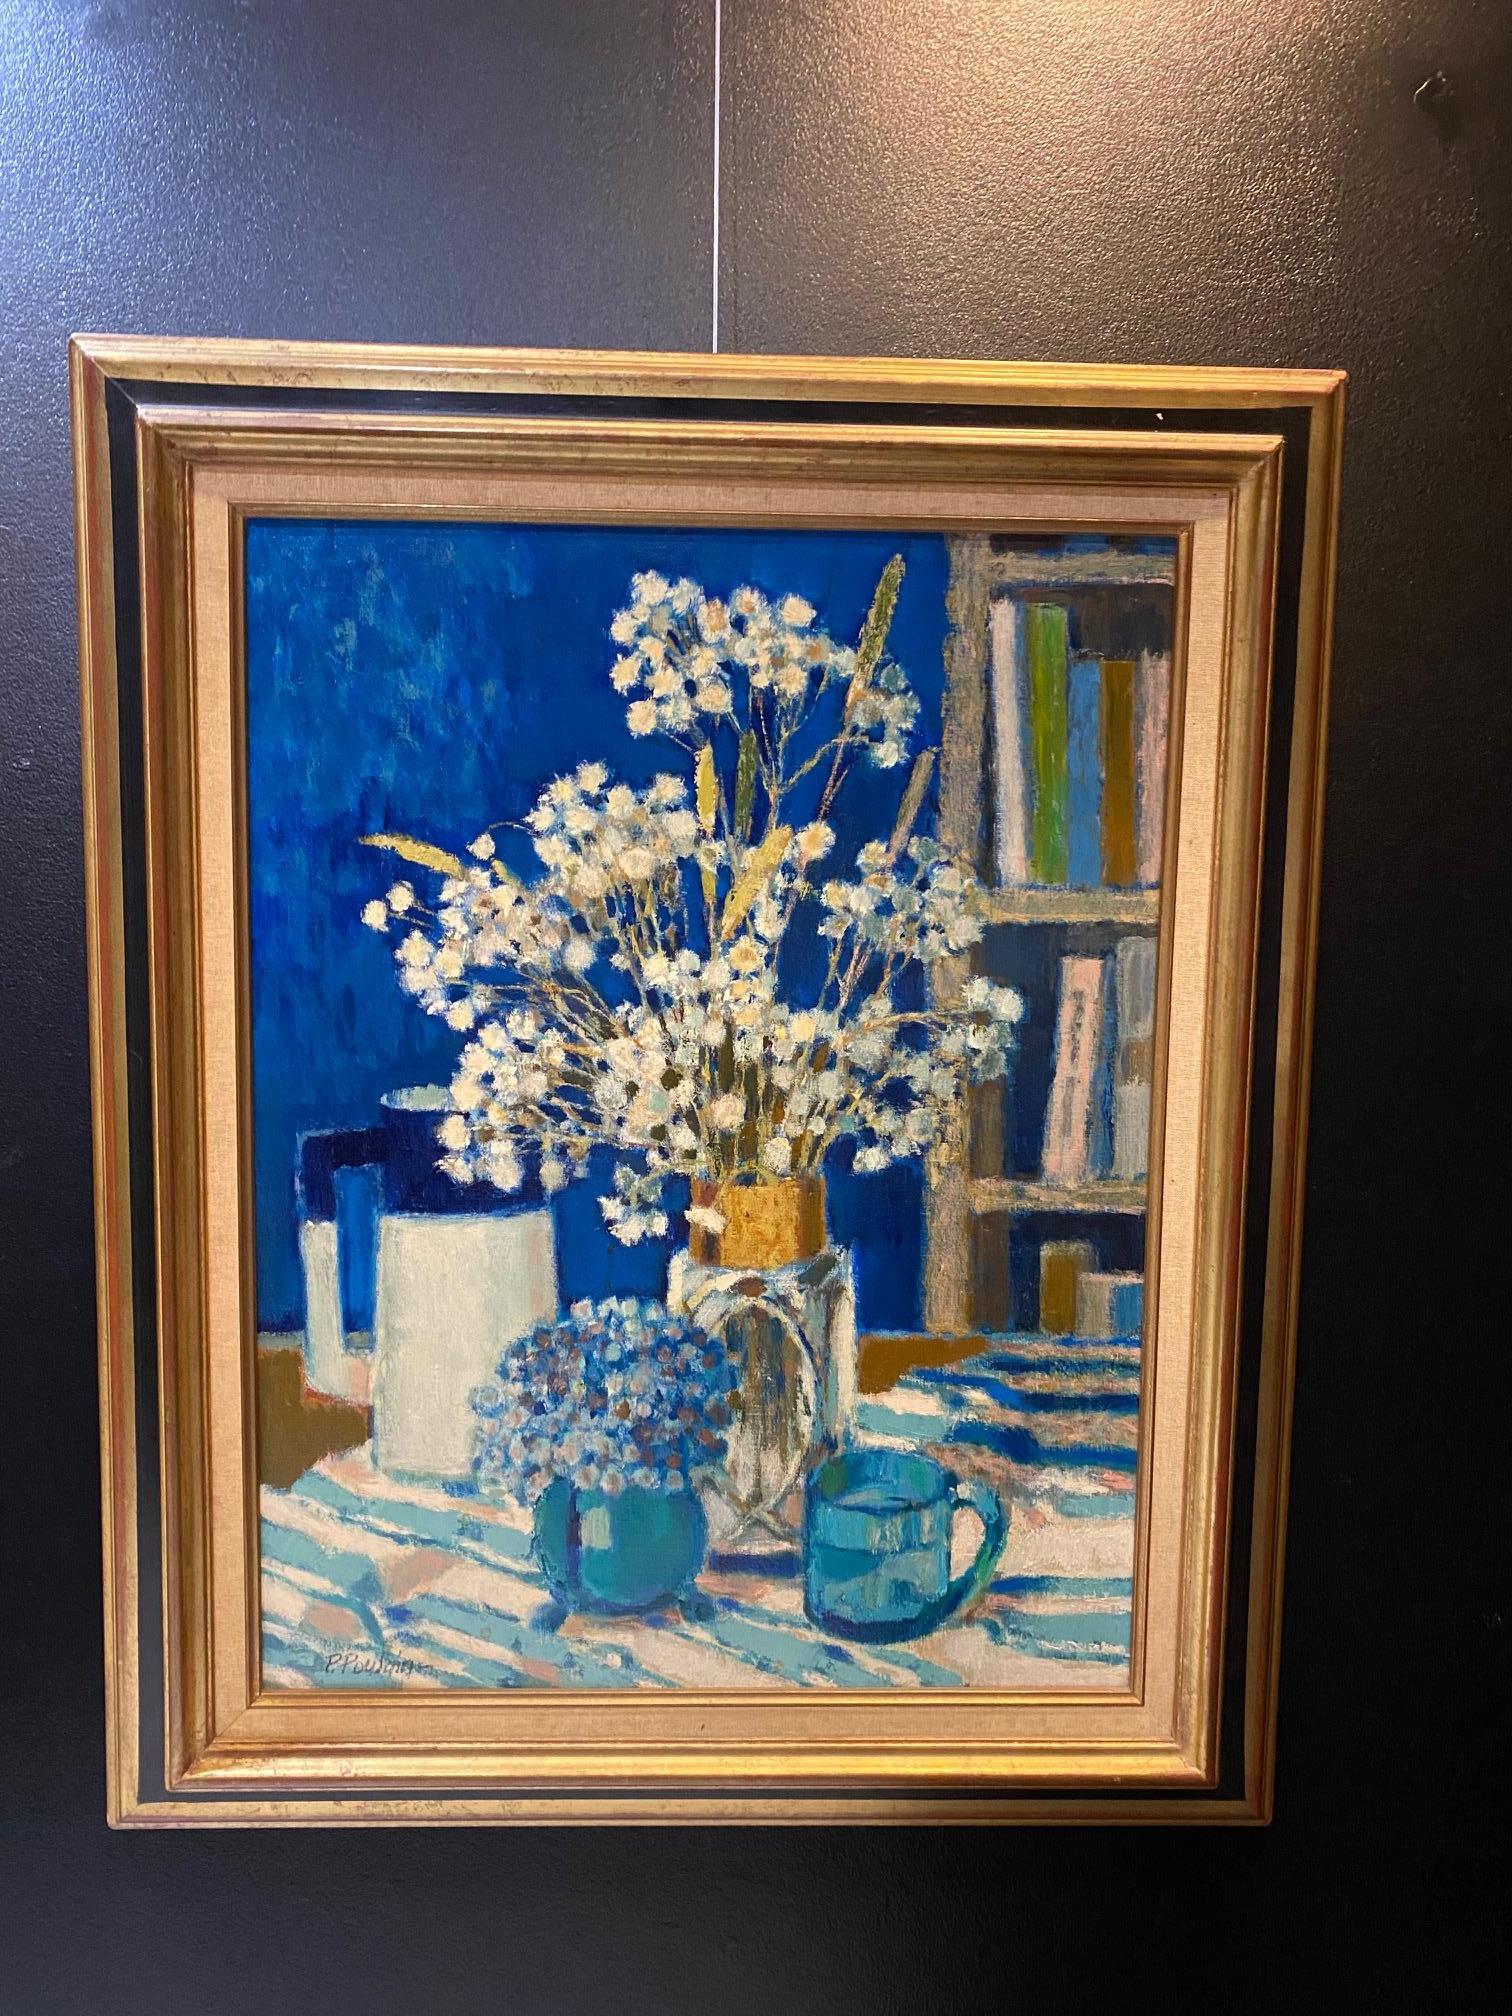 Harmony in blue by Pierre Poulain - Oil on canvas 50x65 cm For Sale 4